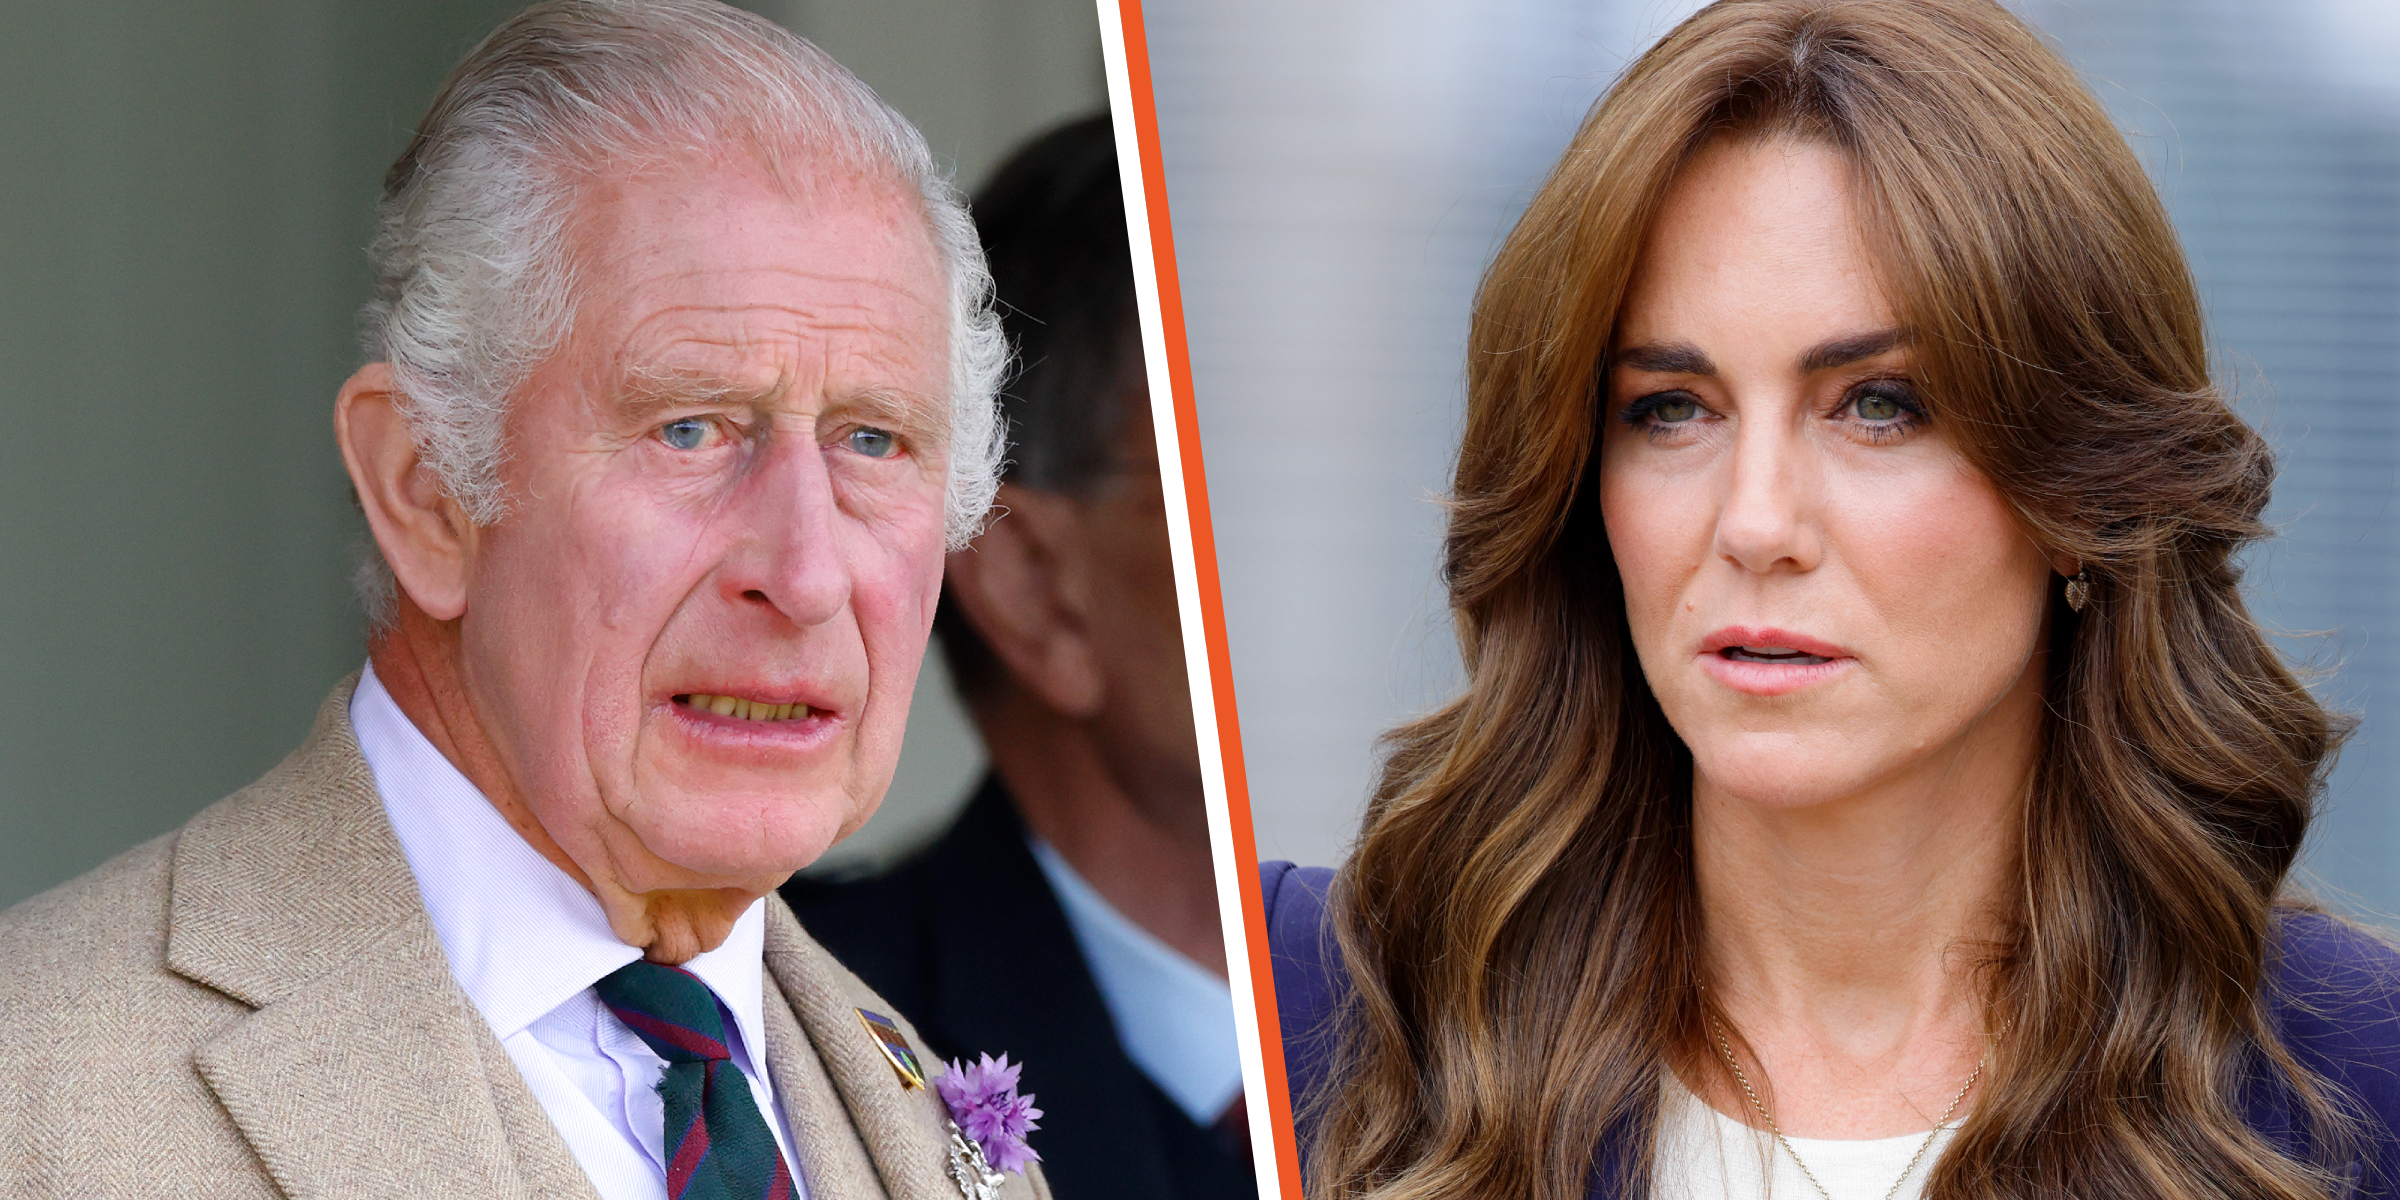 King Charles III | Princess Catherine of Wales | Source: Getty Images